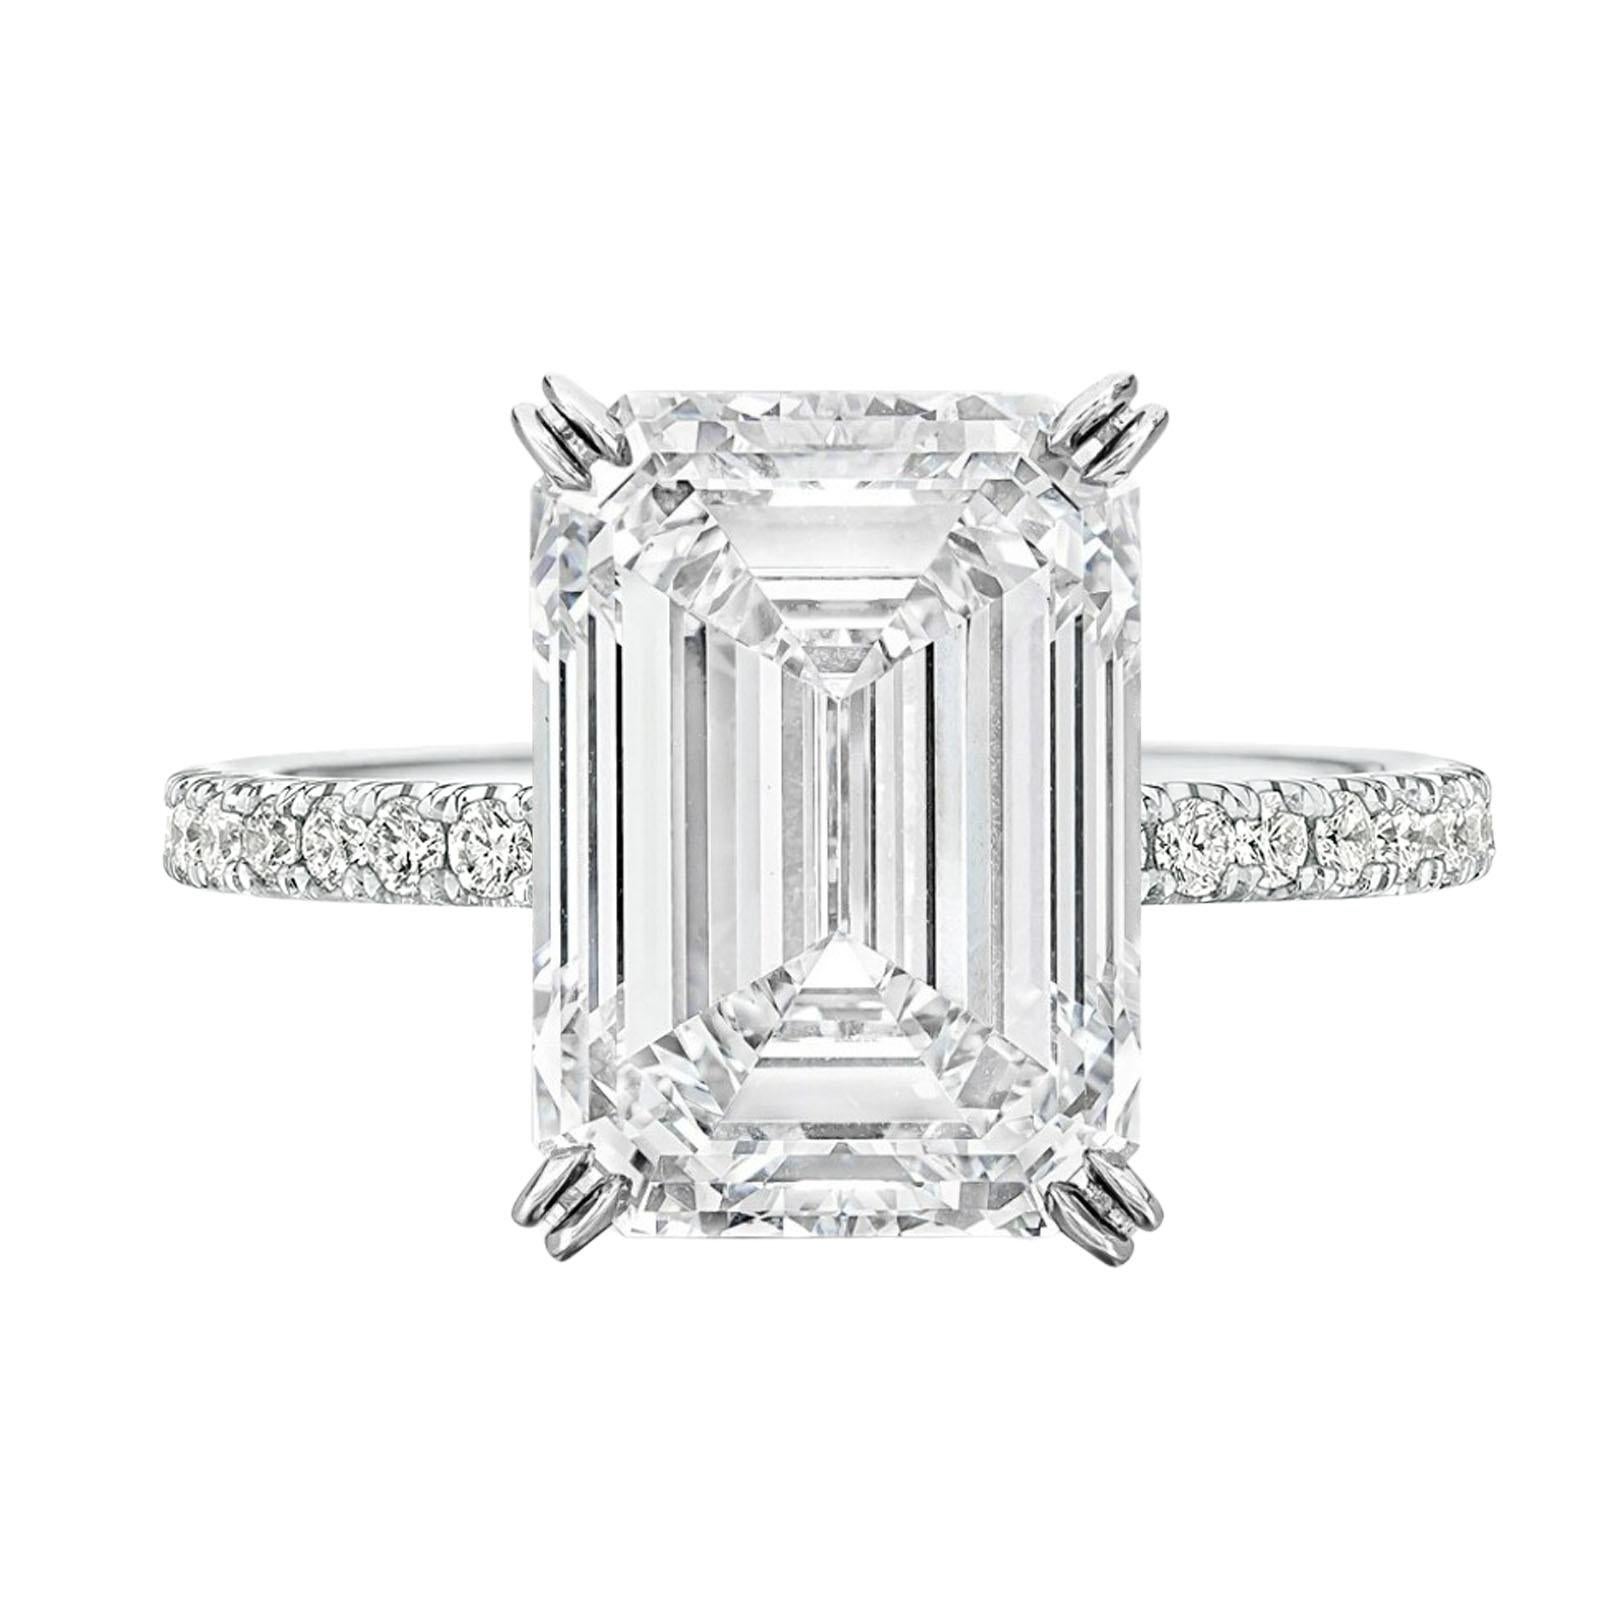 Introducing a masterpiece of elegance and sophistication: a GIA certified 3-carat emerald-cut diamond ring, boasting exceptional E color and internally flawless clarity grades. Certified by the renowned Gemological Institute of America (GIA), this